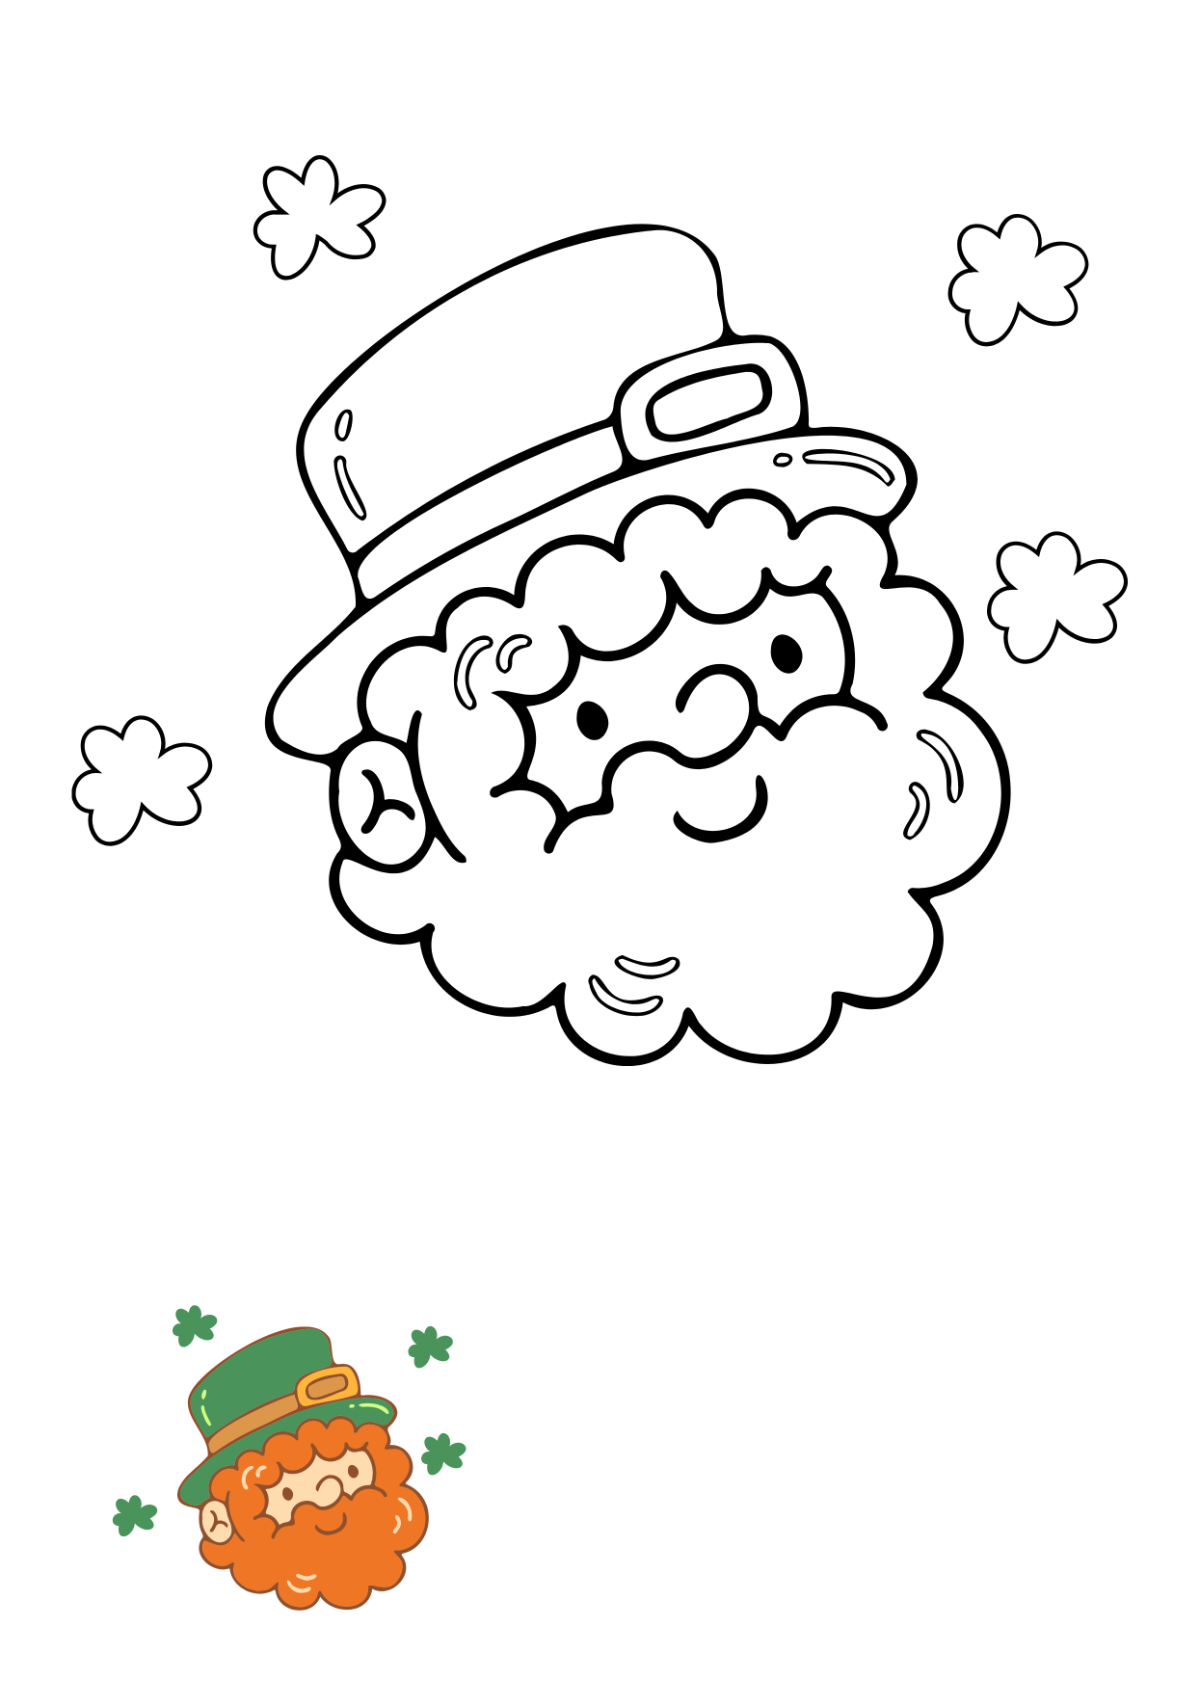 Cute St. Patrick’s Day Coloring Page Template